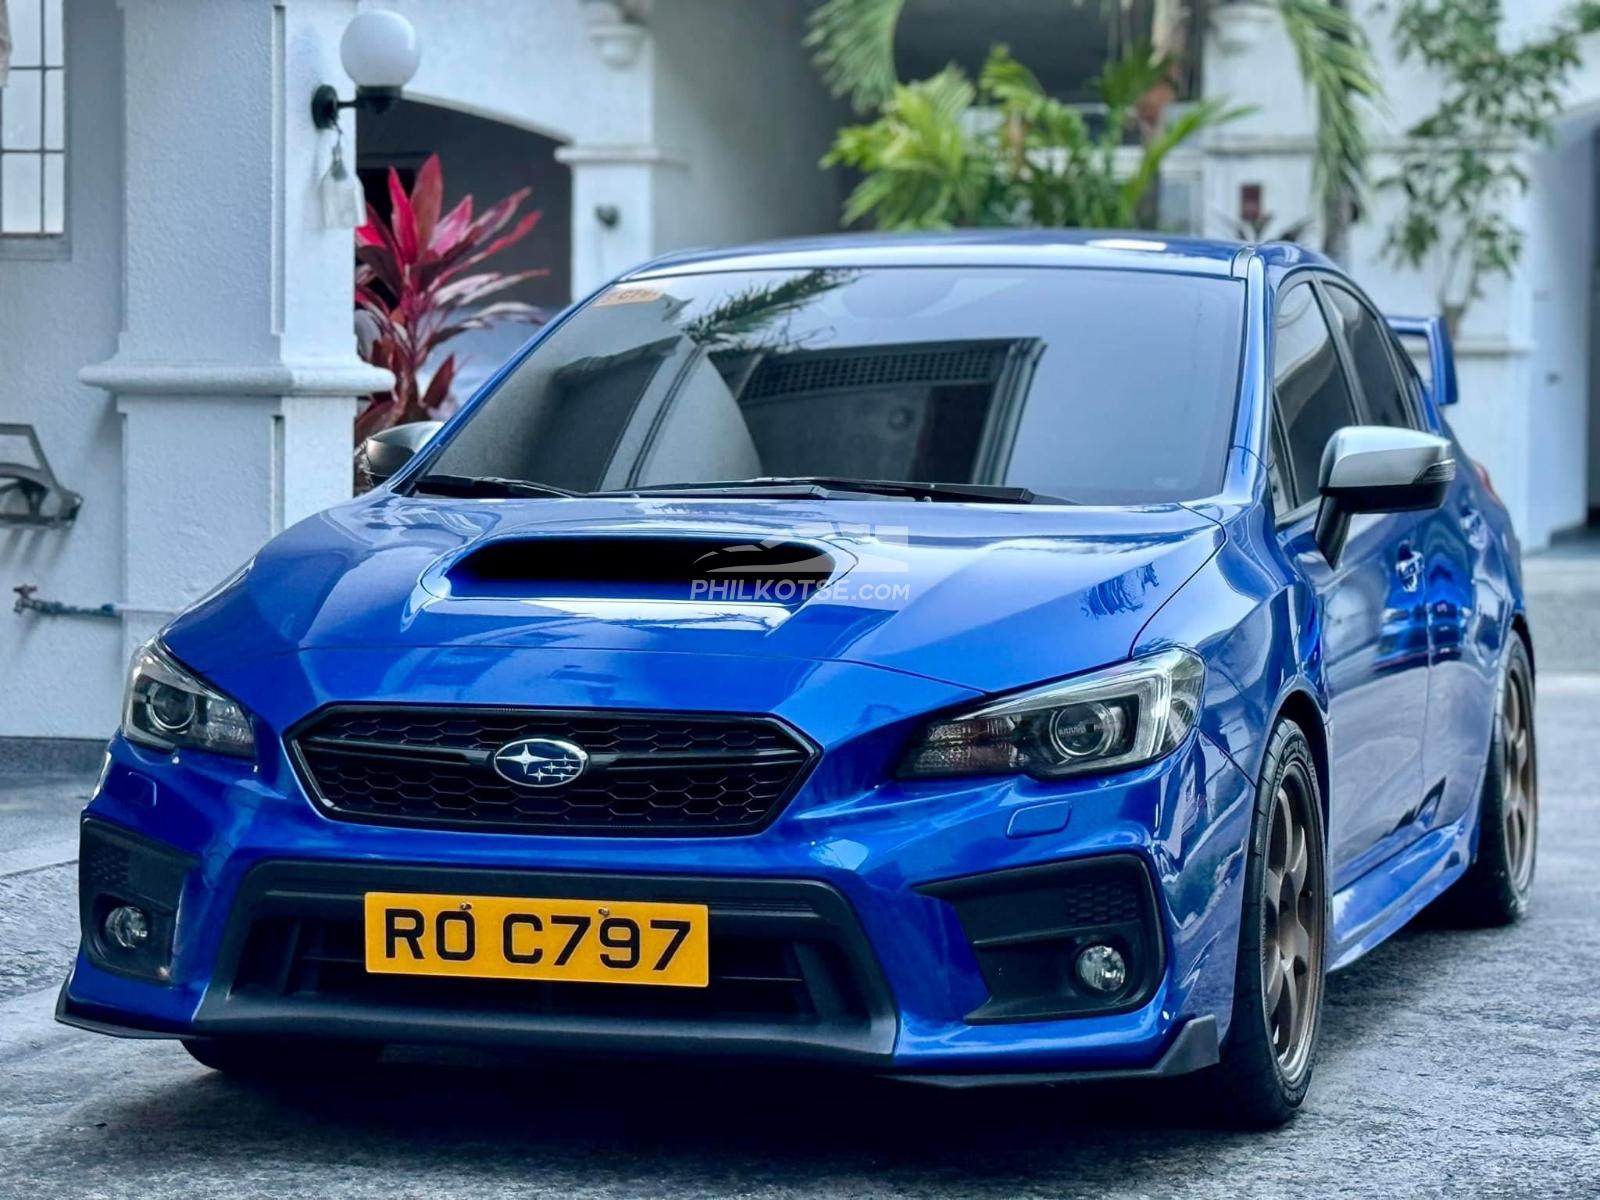 HOT!!! 2019 Subaru WRX AWD 2.0 Turbocharge for sale at affordable price